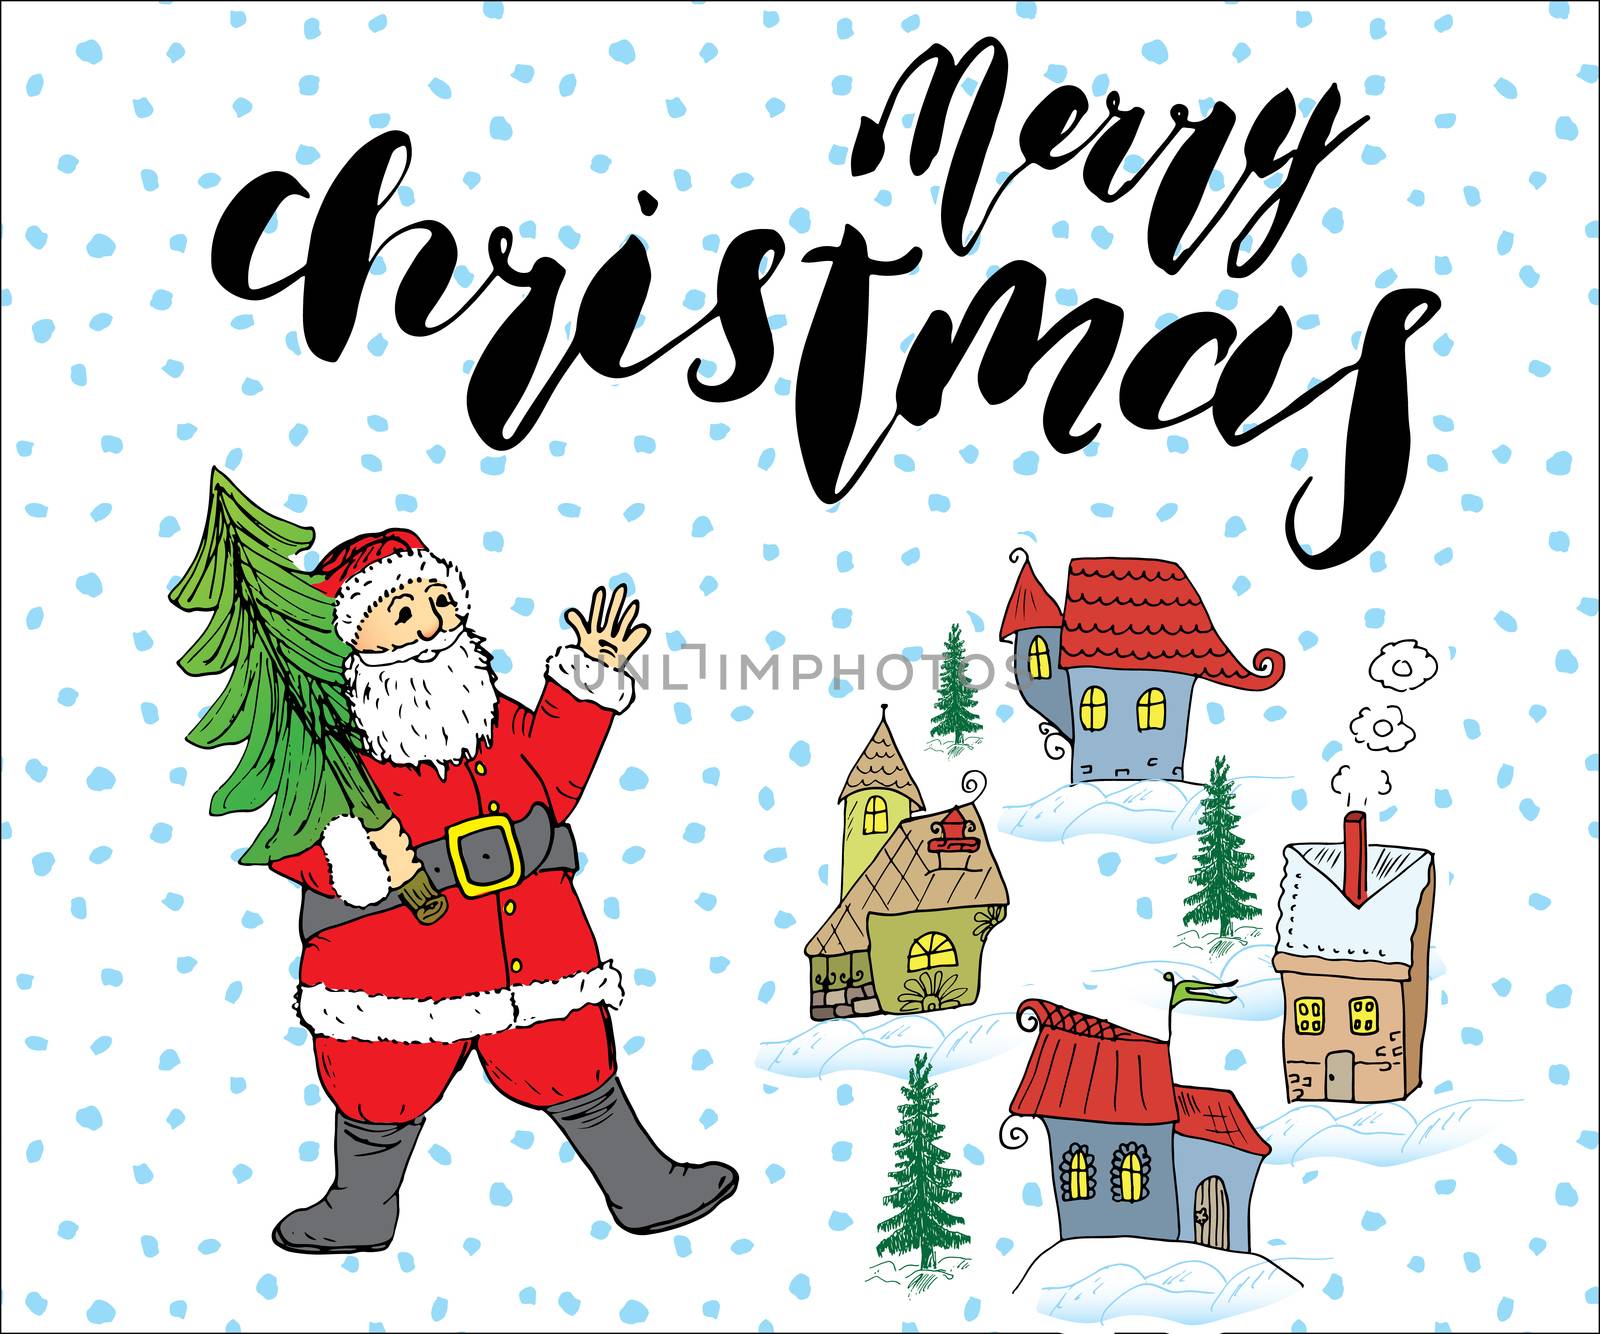 Merry Christmas lettering. Hand drawn vector illustration